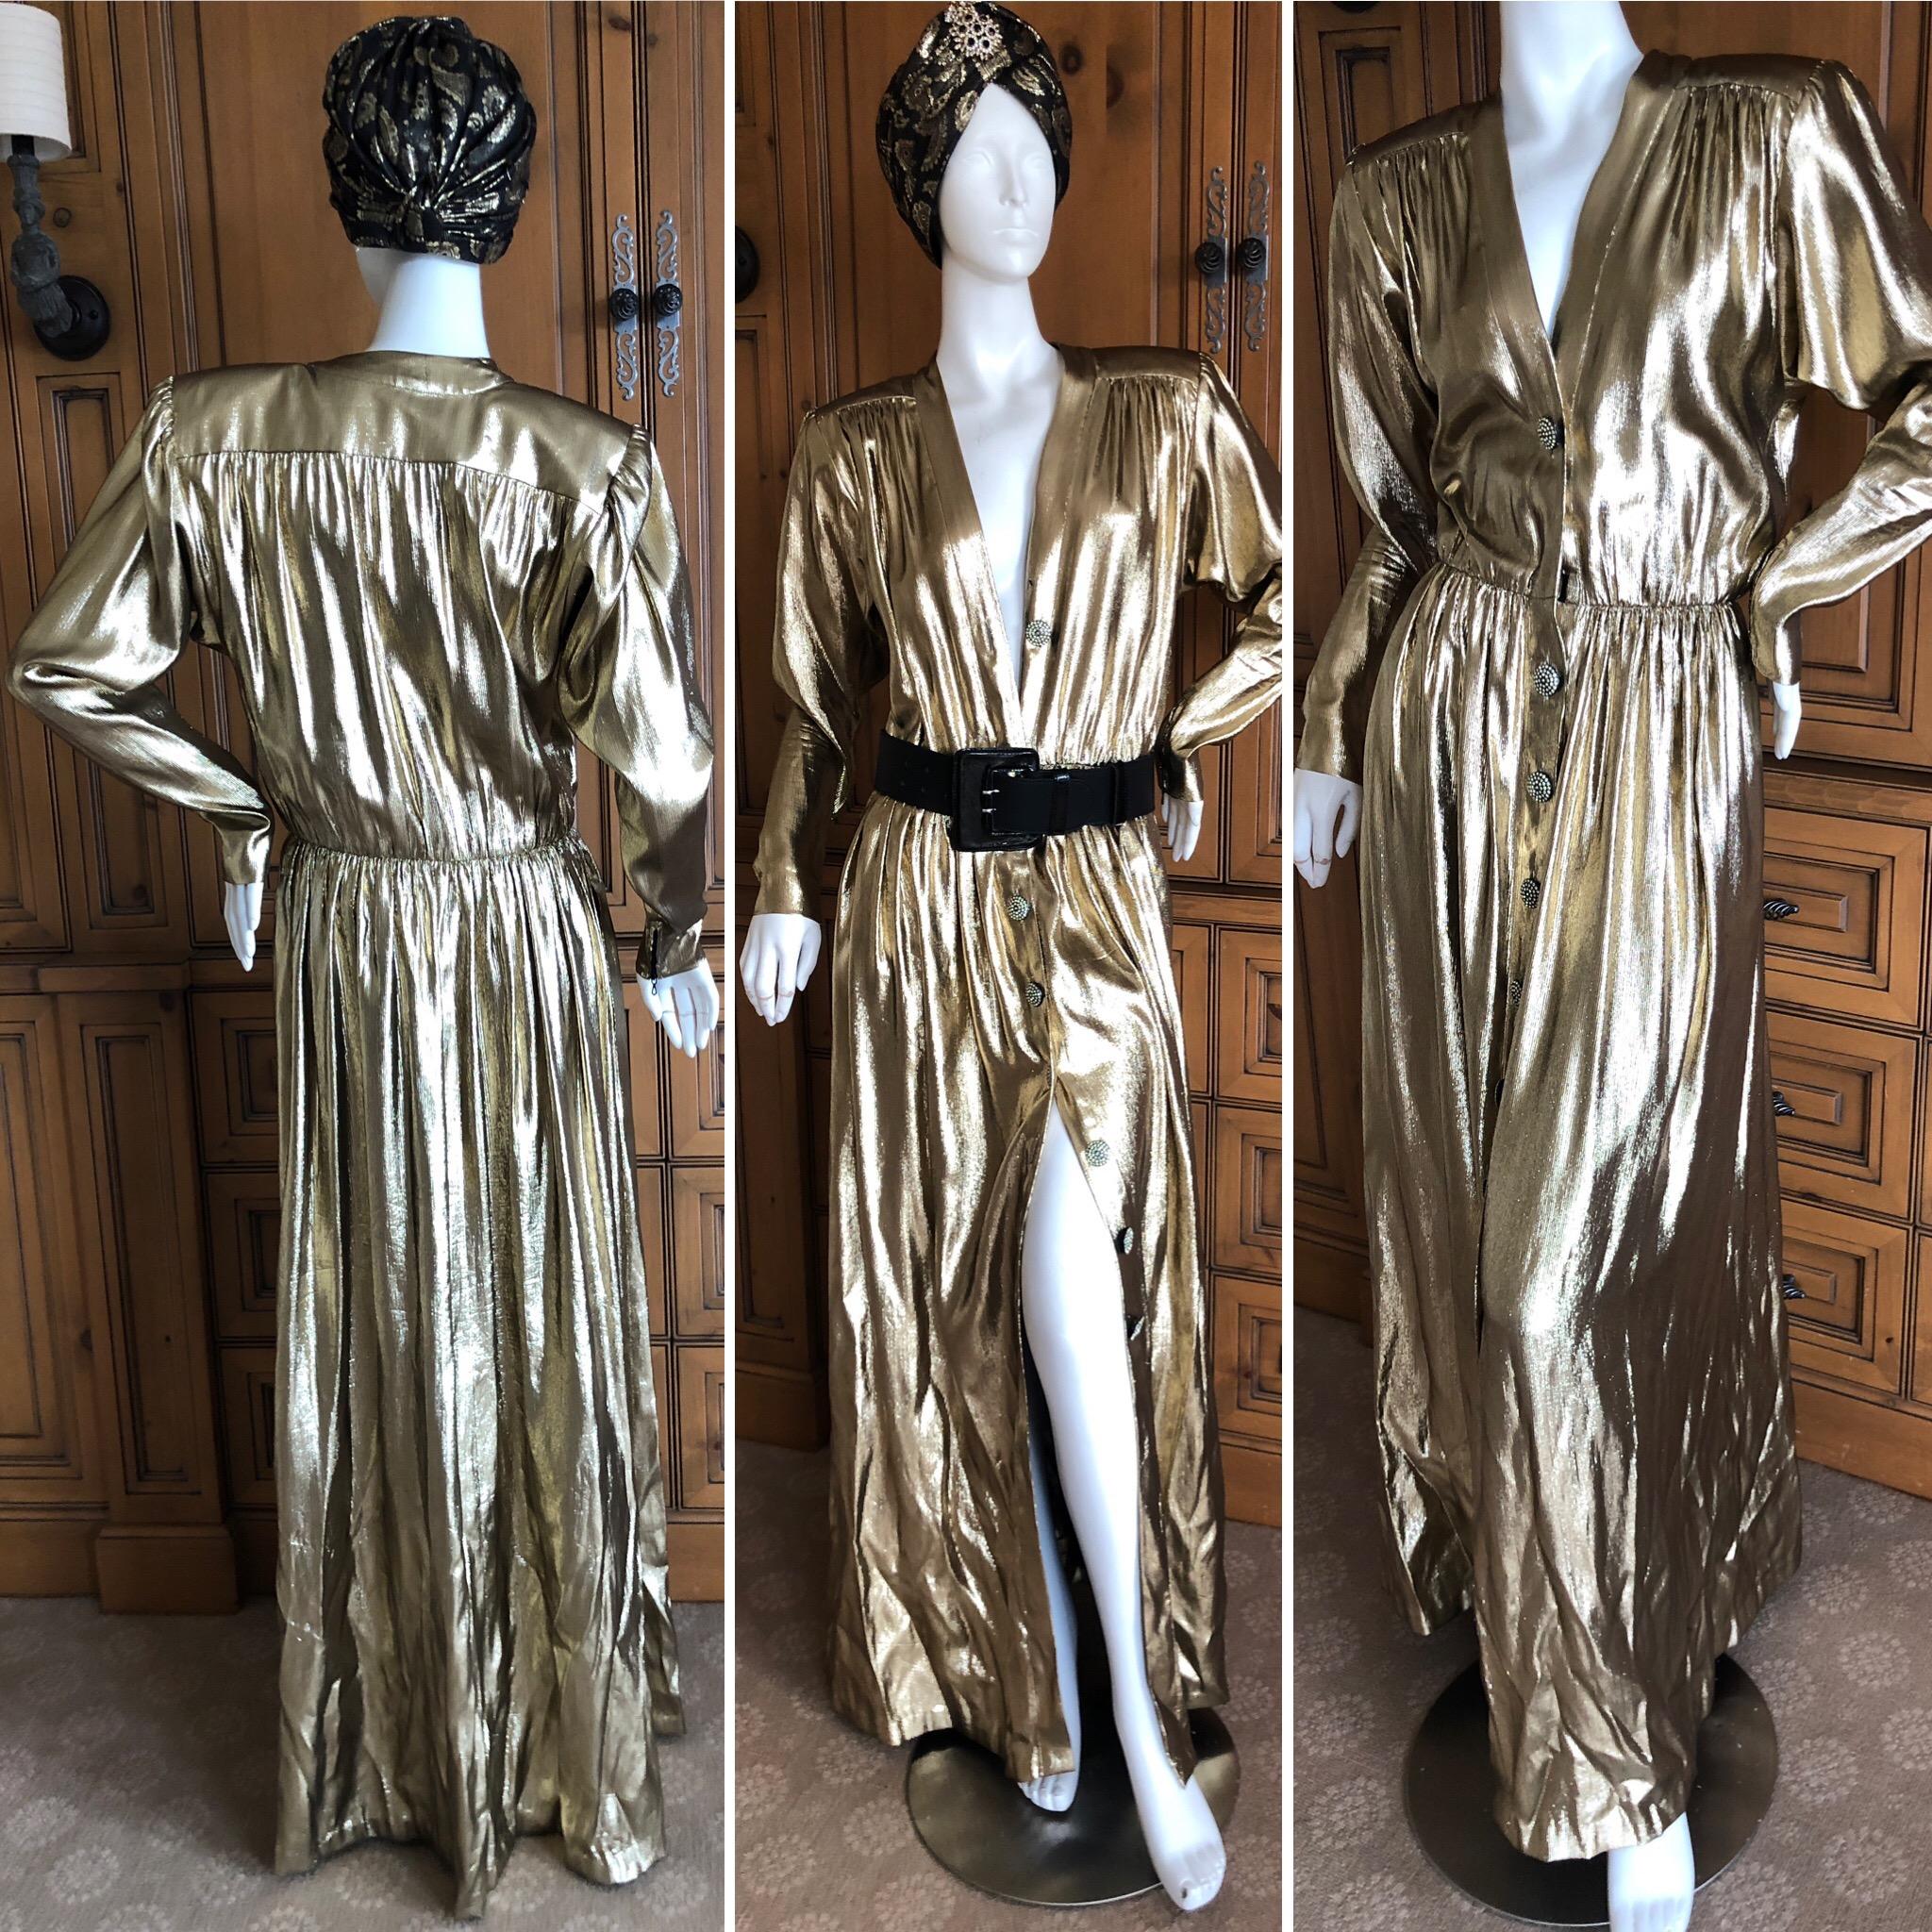 Yves Saint Laurent Rive Gauche 1979 Metallic Gold Silk Structured Shoulder Evening Dress .
Large crystal buttons down the front, this opens all the way, so can reveal more , or less skin.
Truly magnificent, in excellent condition.
Marked size 44,